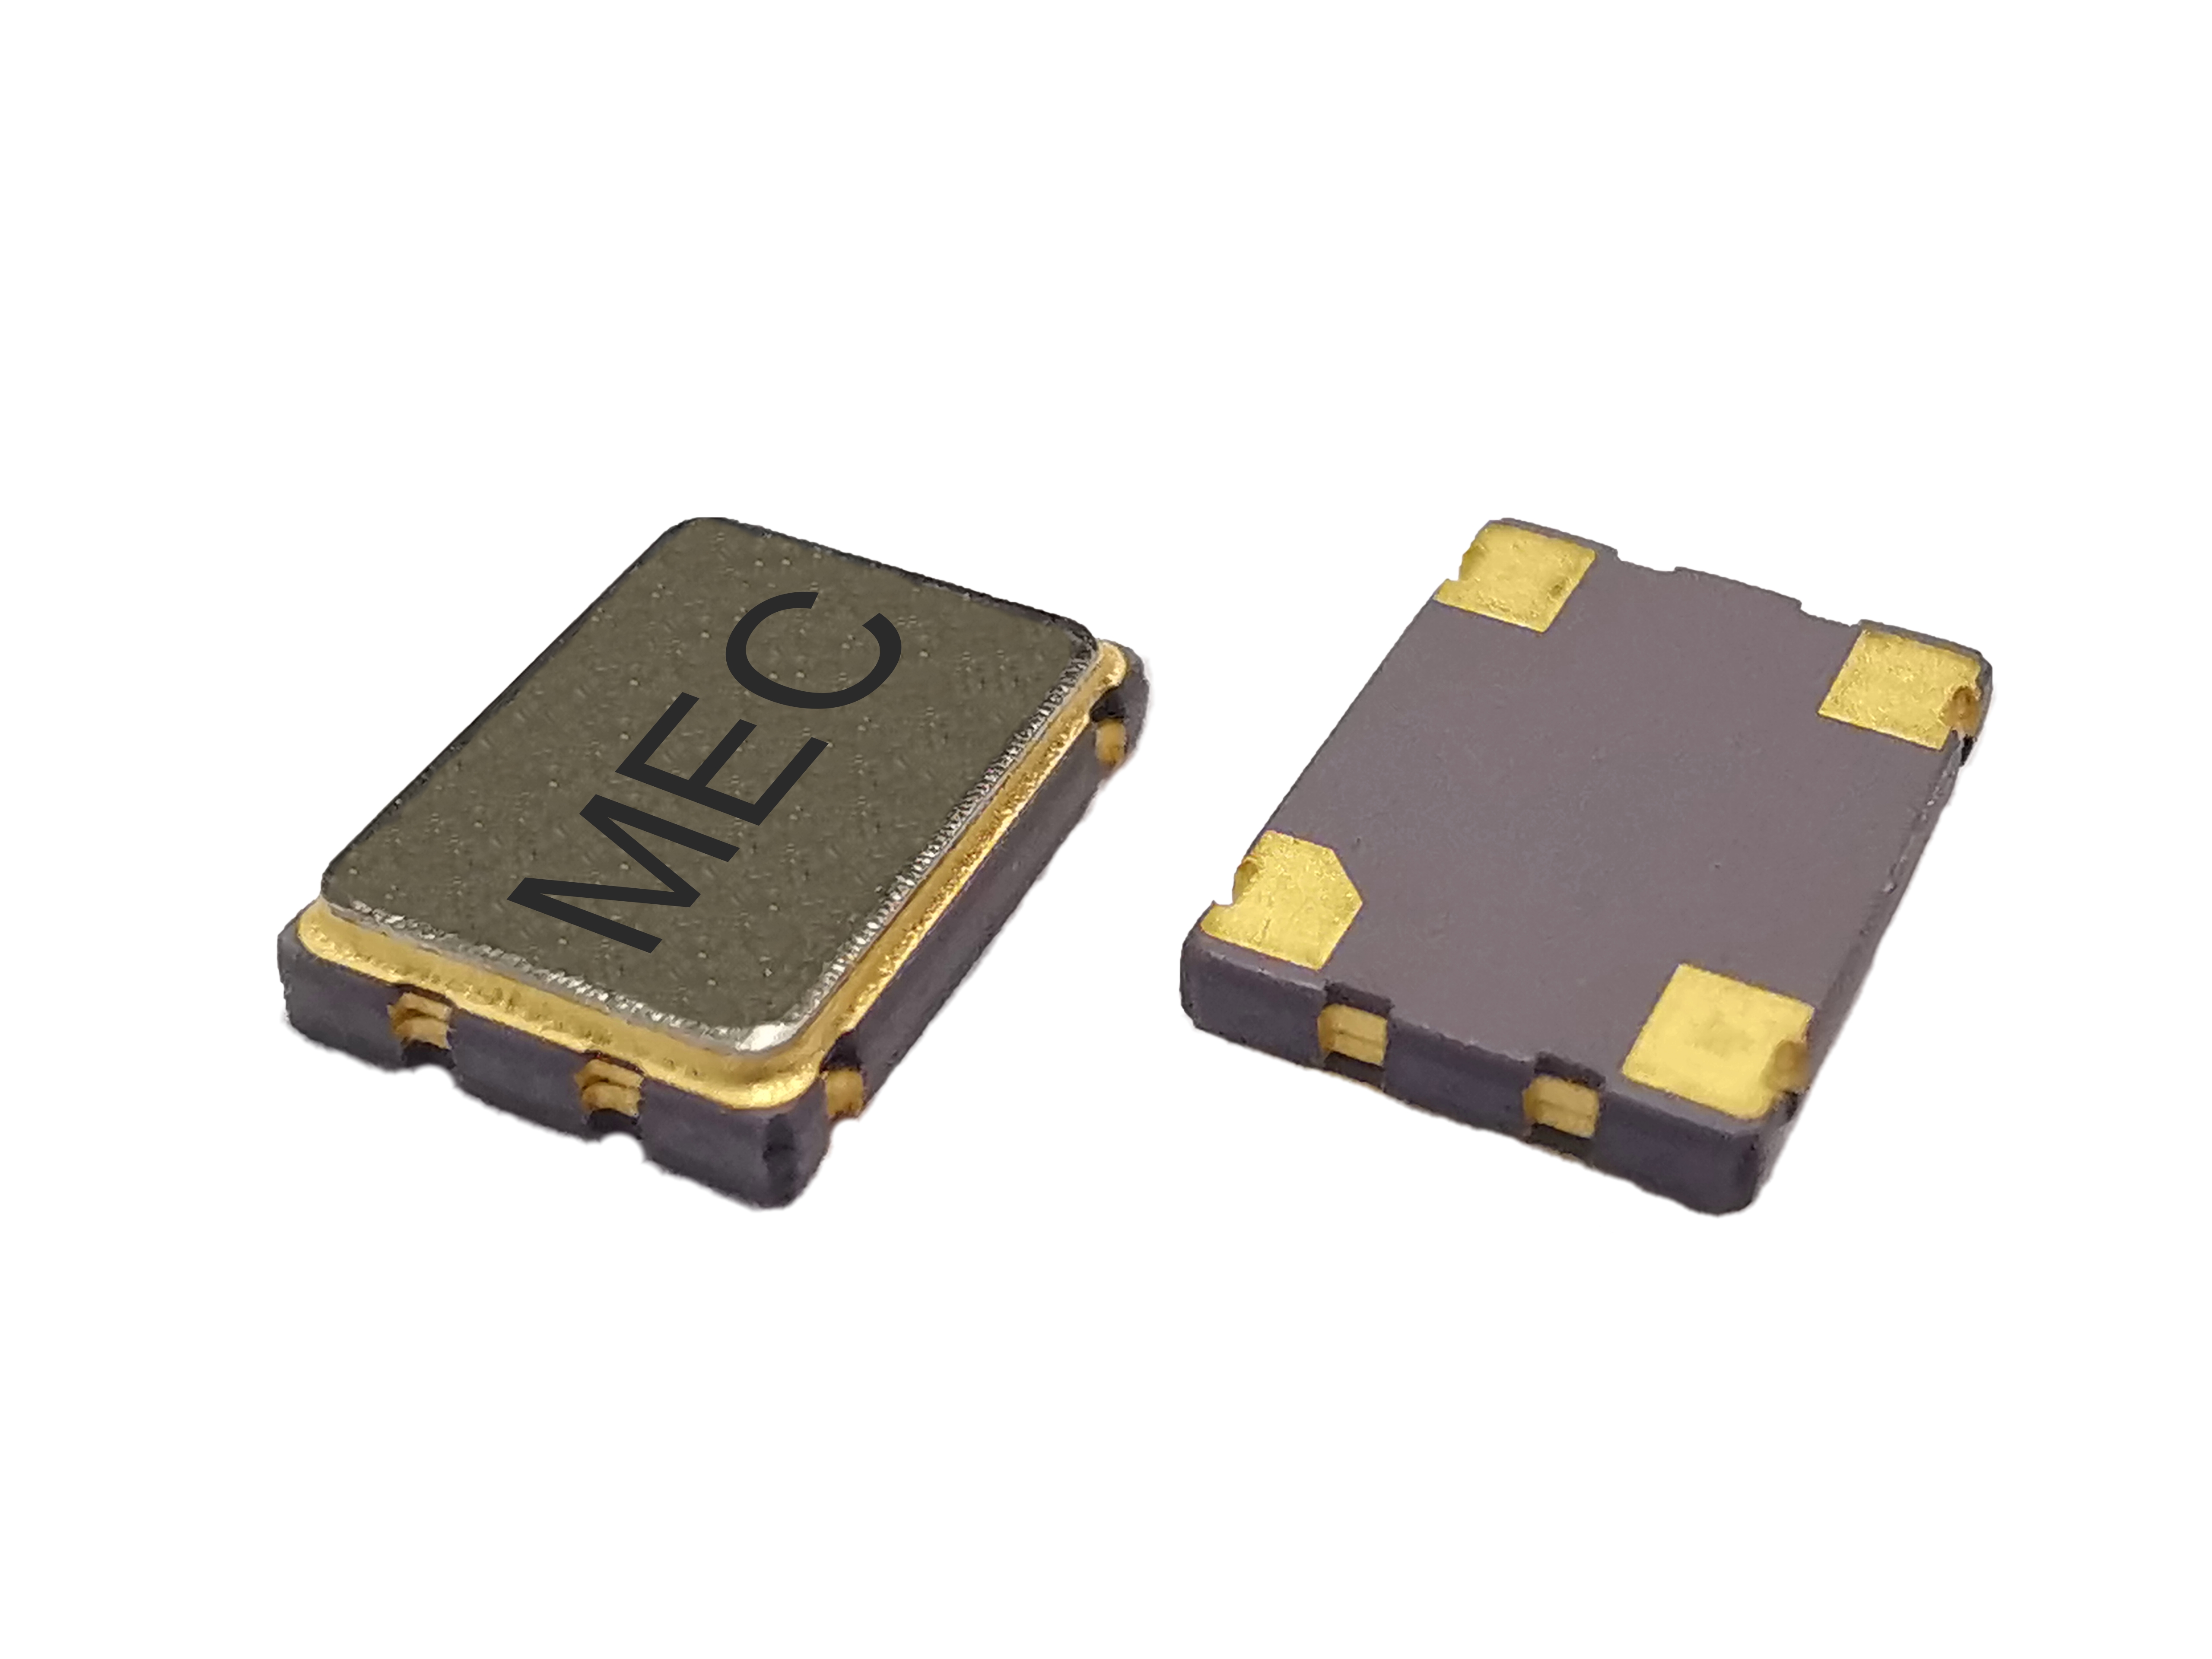 HY57 7050 1.8V Wide Operating Temperature -40℃ to +125℃ CMOS SMD Crystal Oscillator